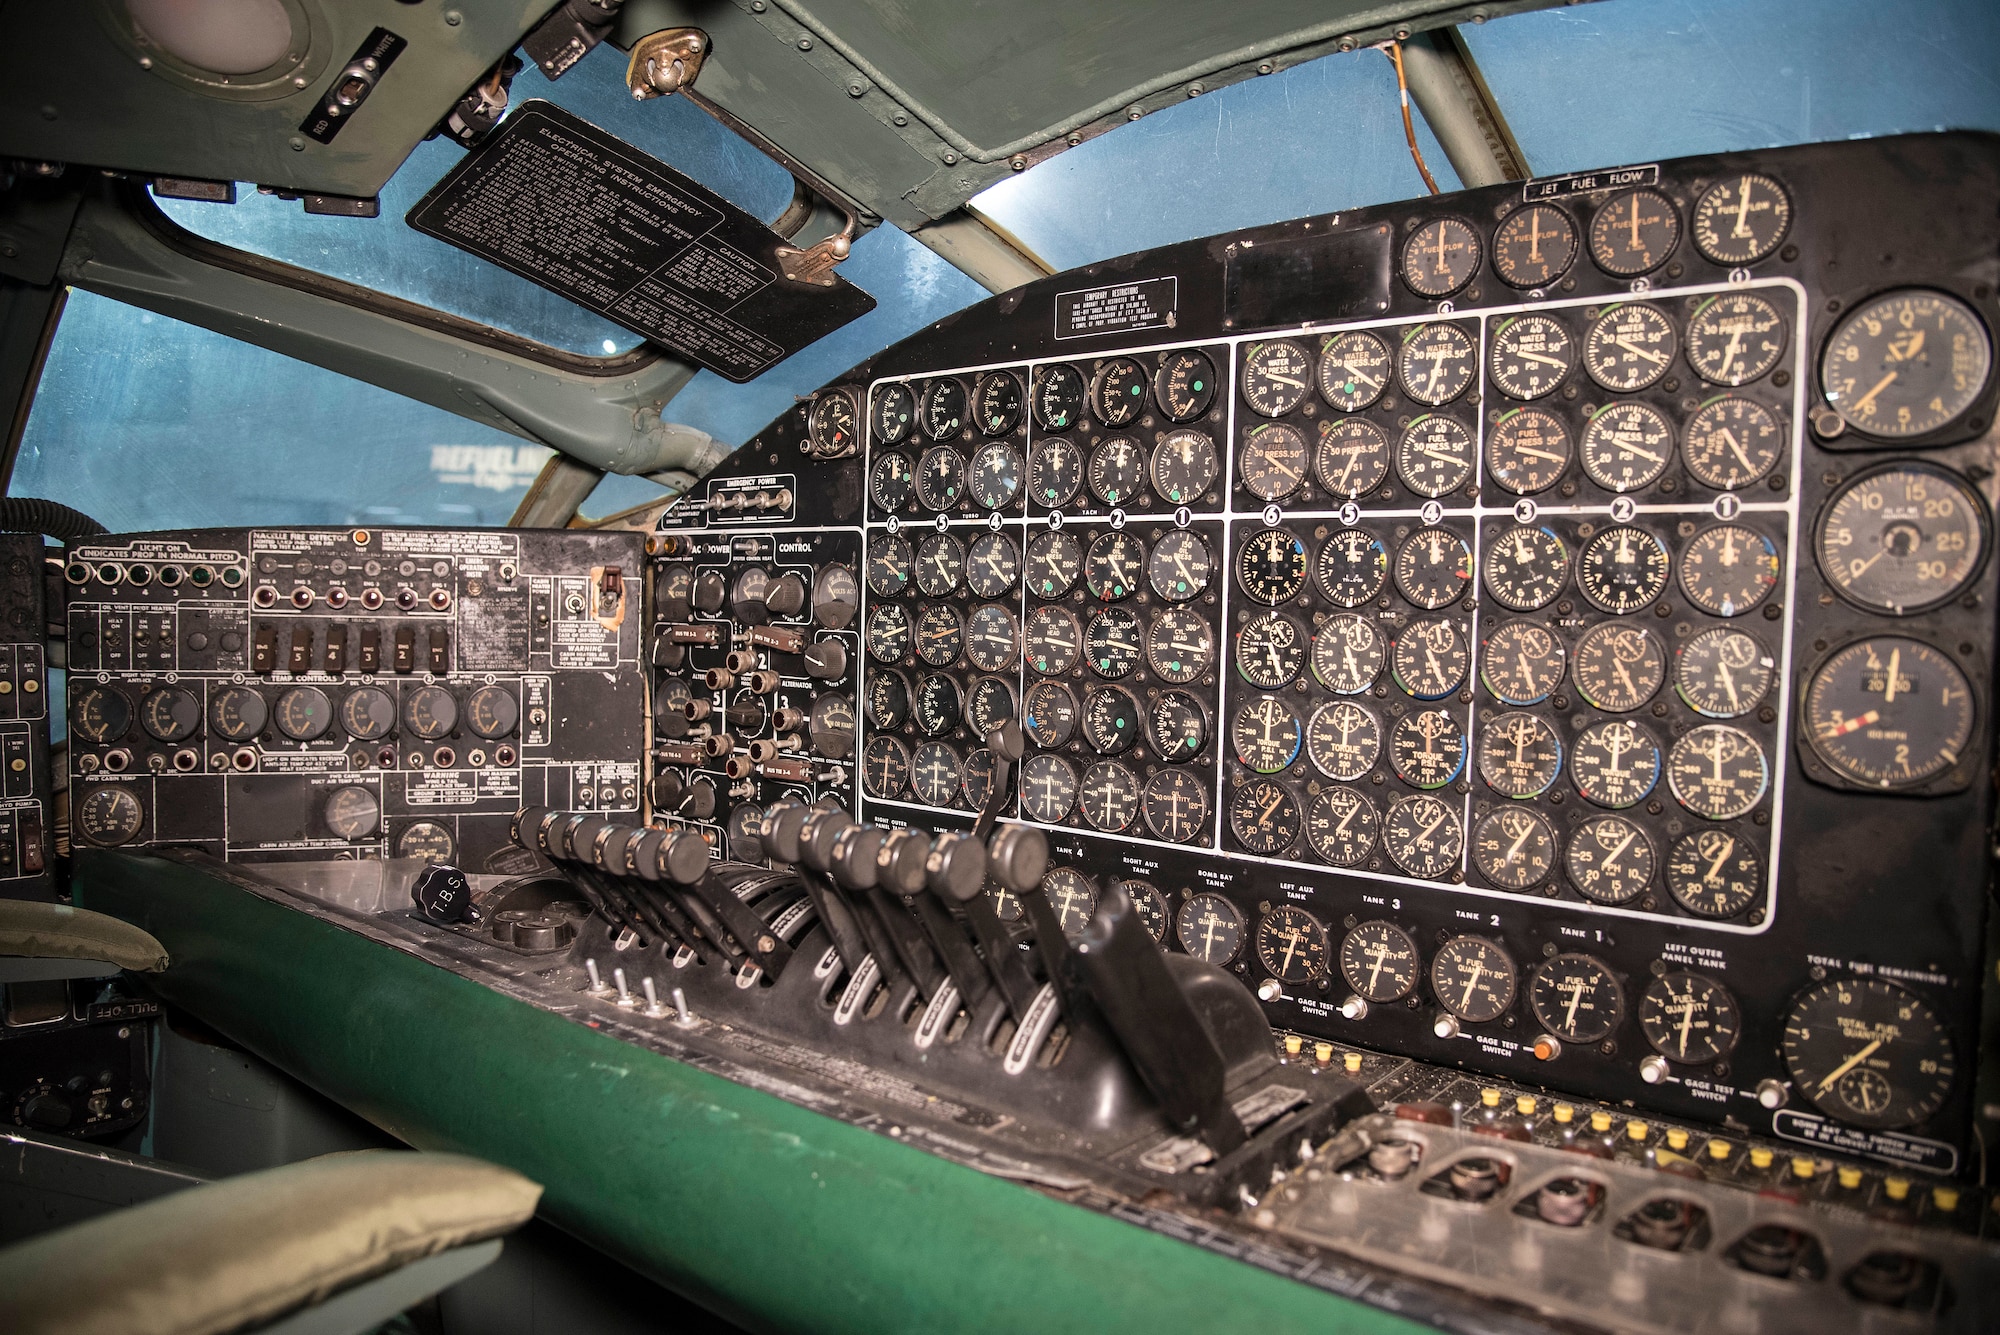 DAYTON, Ohio - Convair B-36J Peacemaker engineer station at the National Museum of the U.S. Air Force. (U.S. Air Force photo by Ken LaRock)